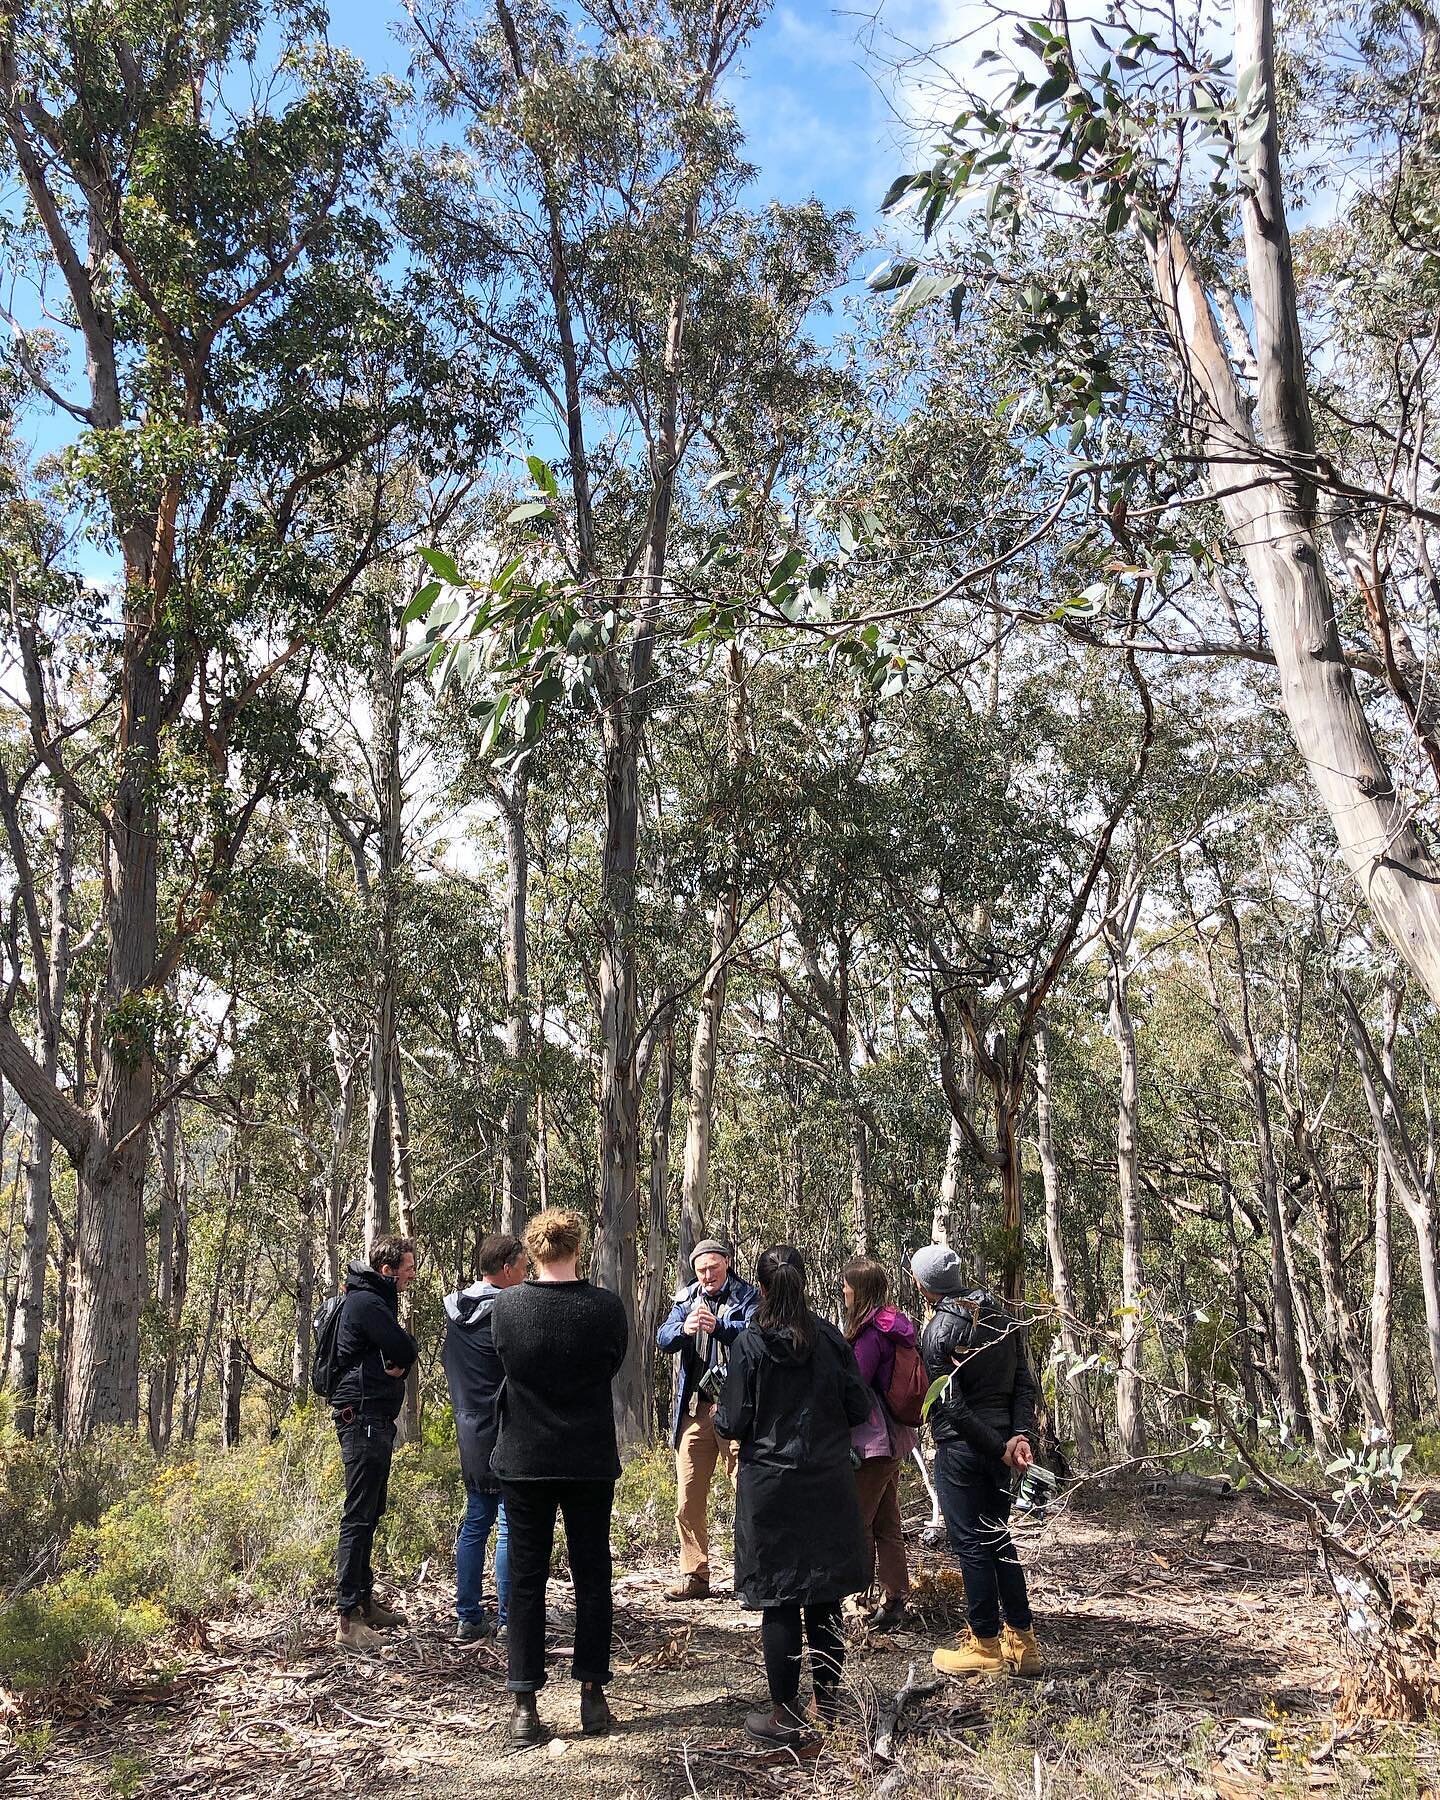 IP Field Notes 
Last week our practice attended a guided walk on kunanyi (Mt Wellington) with Dr Rob Wiltshire from the UTAS School of Biological Sciences. As we wandered through the varying vegetation communities Rob shared his knowledge, experience